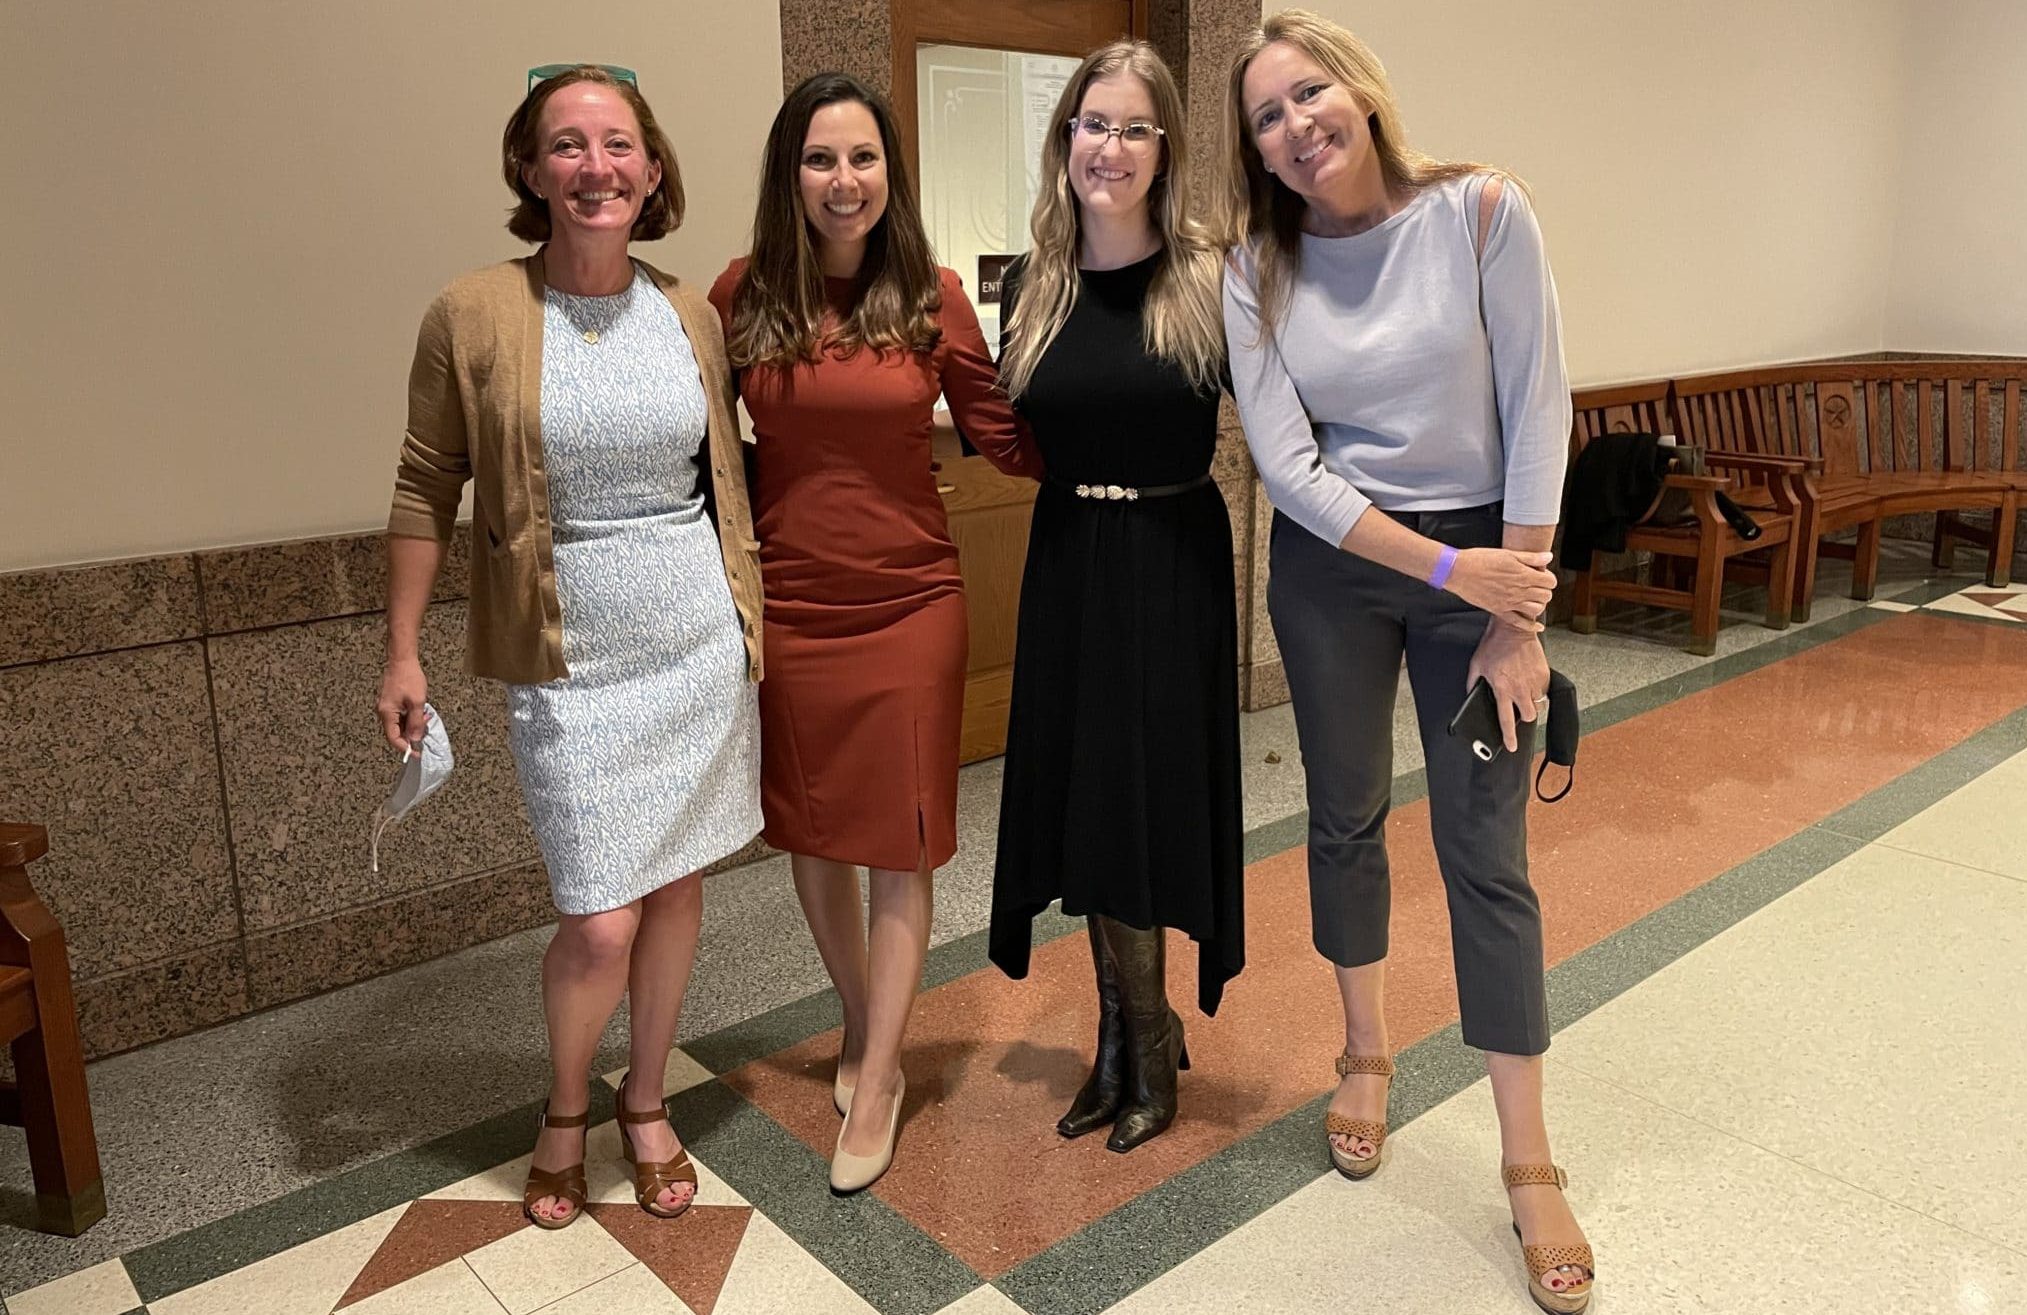 Four women inside the Texas State Capitol Building. From left to right: Beth Corbett, Central Texas Food Bank Director of Advocacy and Public Policy, Valerie Hawthorne, North Texas Food Bank Director of Government Relations, Jamie Olson, Feeding Texas Director of Policy and Advocacy, and Celia Cole, Feeding Texas CEO